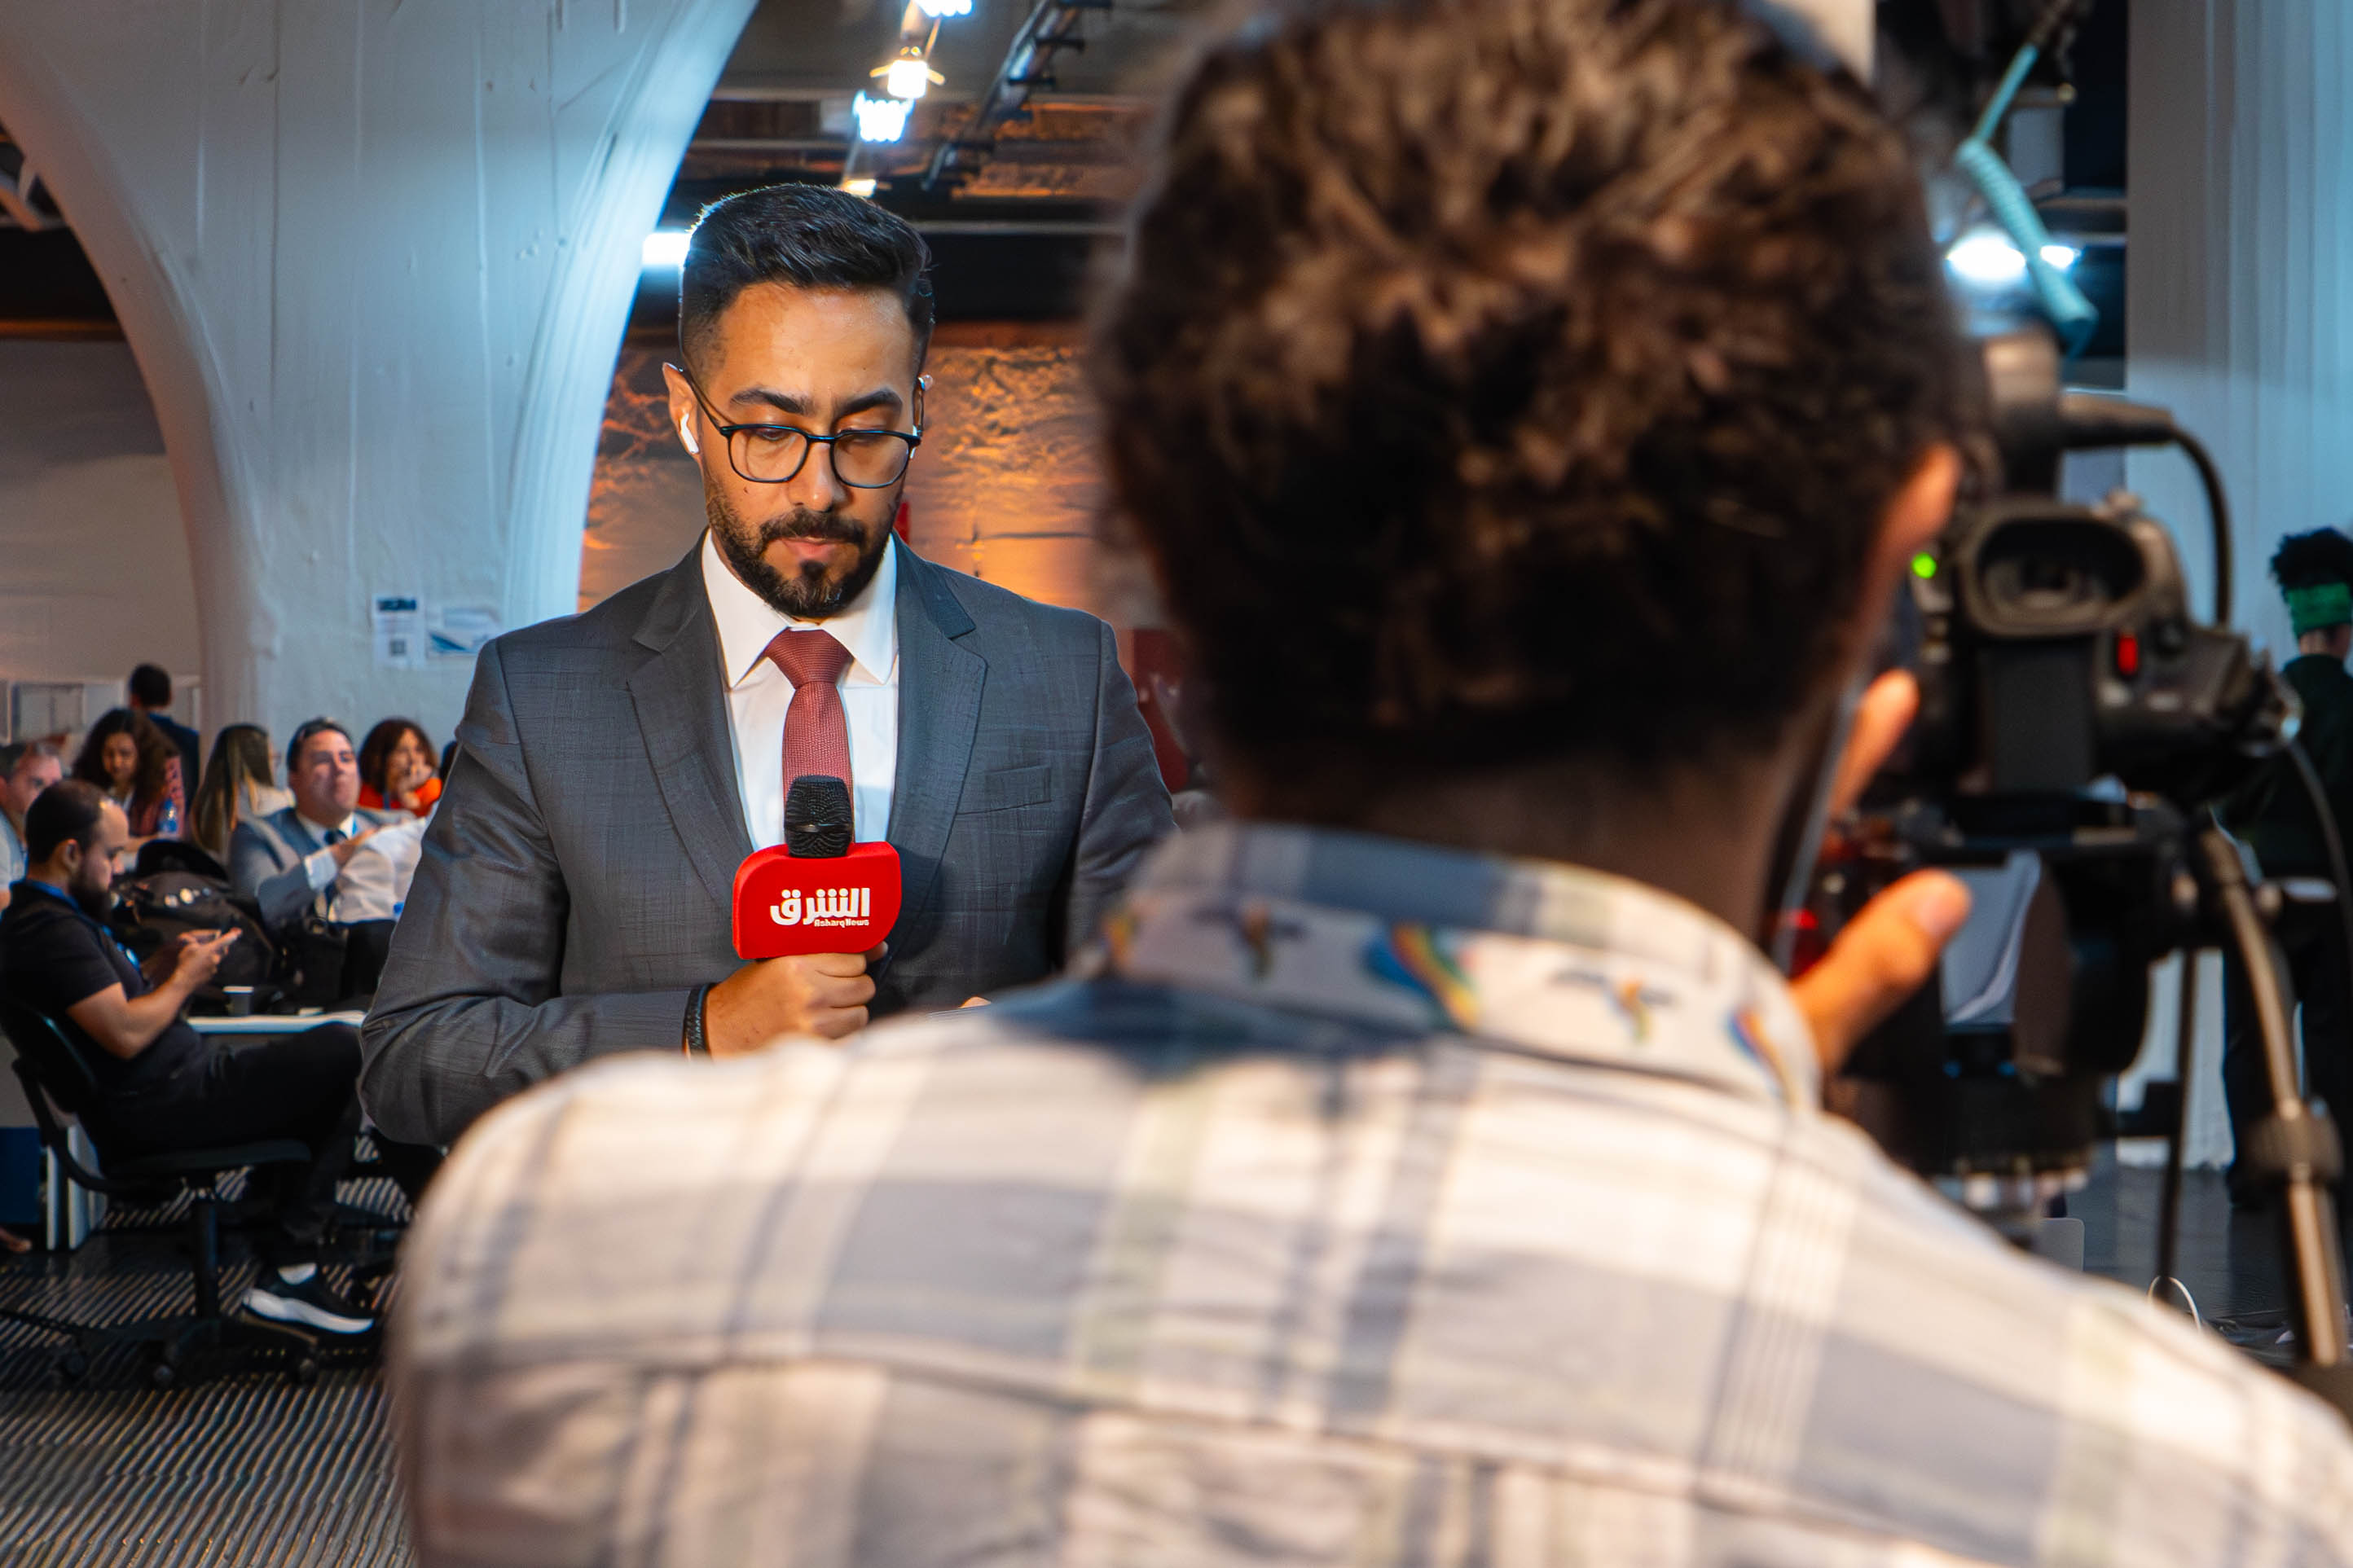 Asharq News reporter live from the Middle East | Photo: Audiovisual/G20